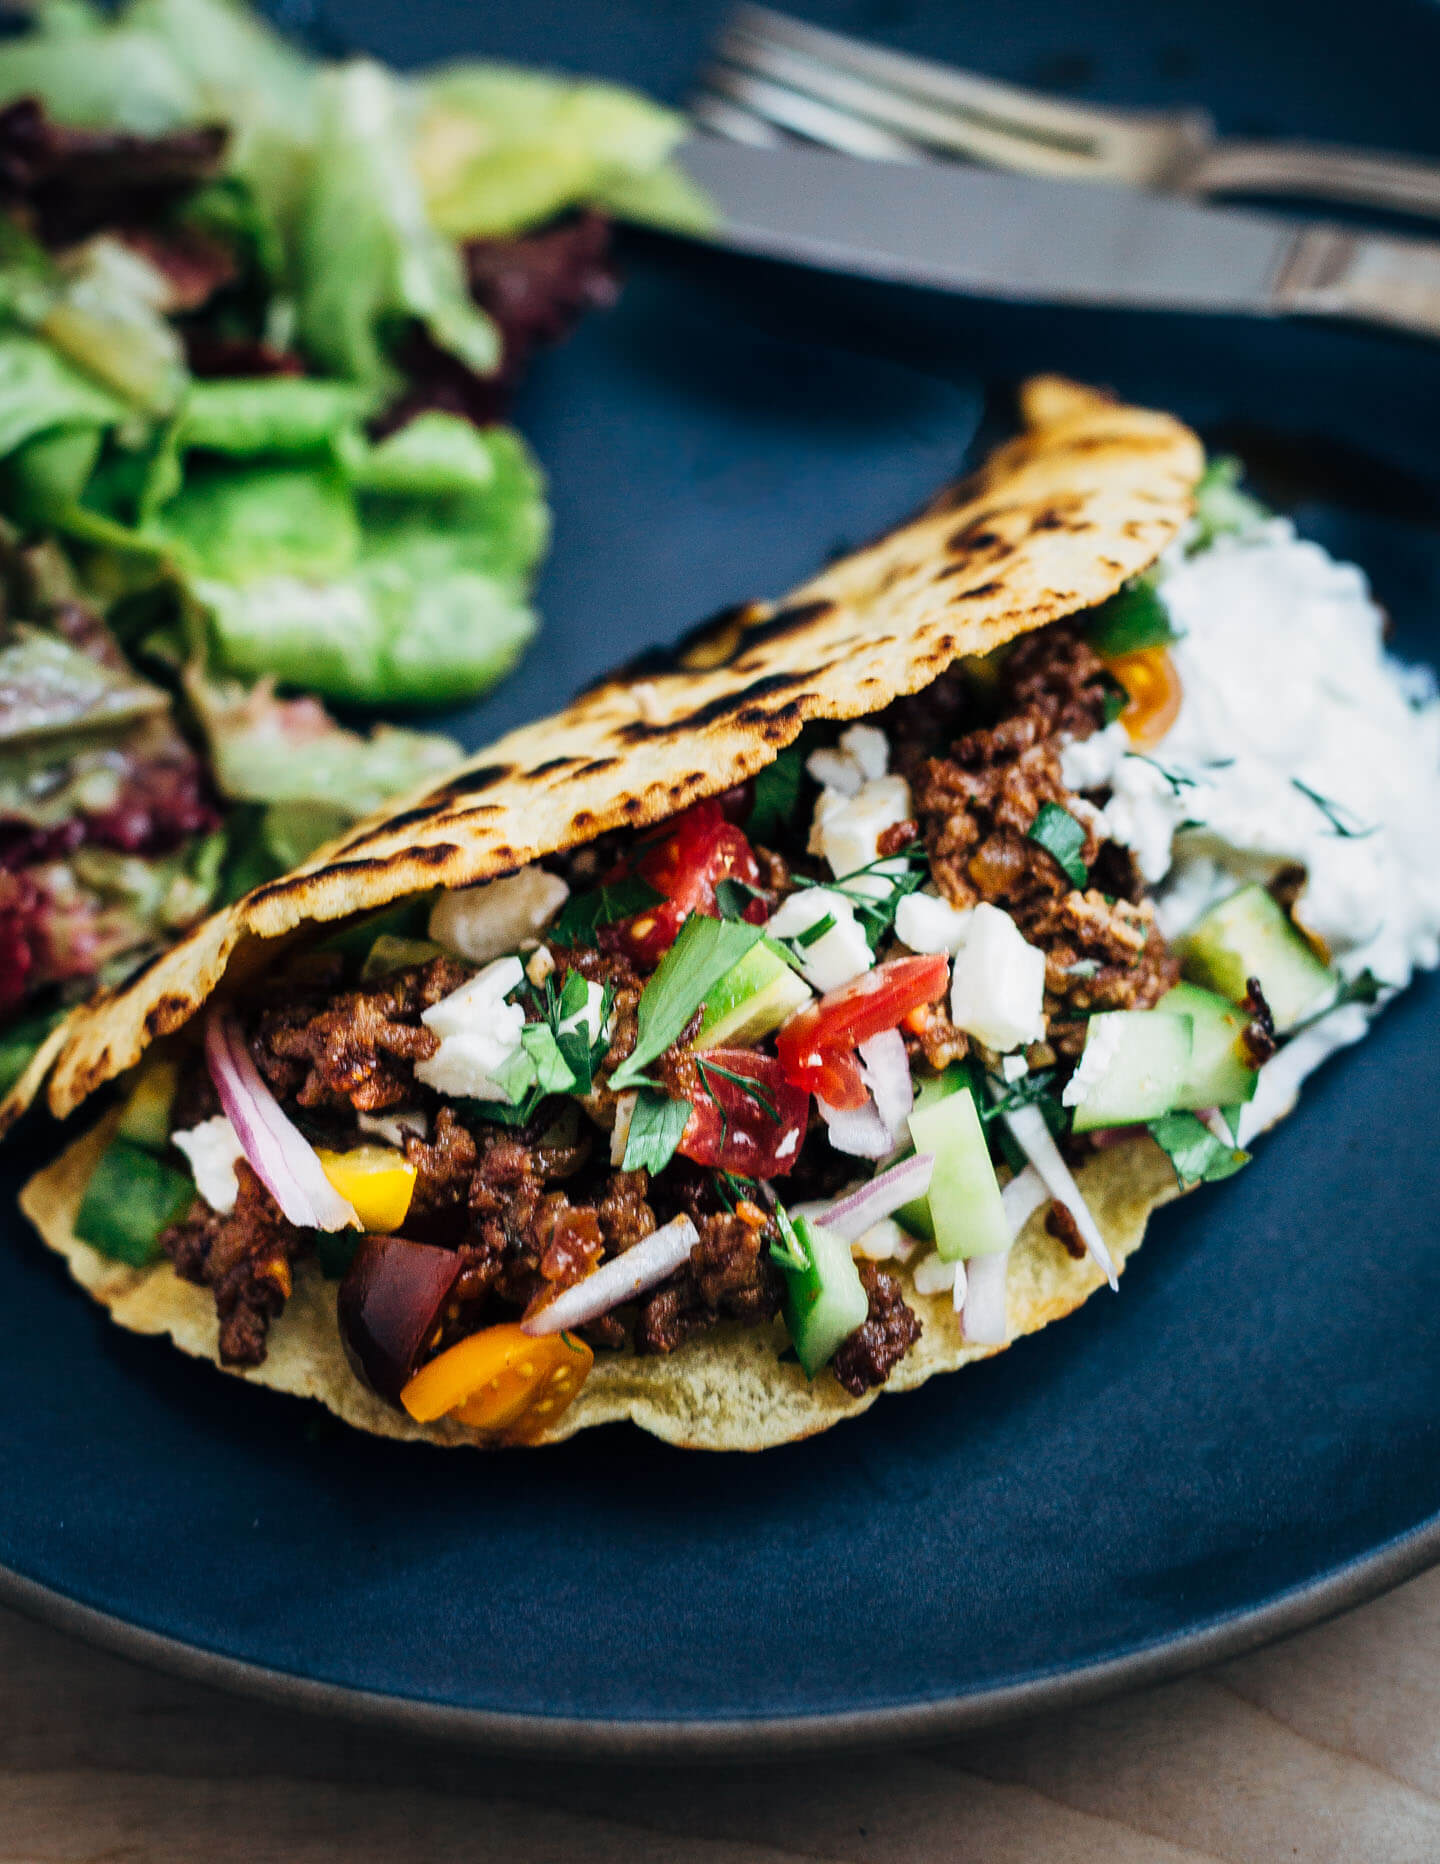 Greek-inspired lamb tacos are a revelation. They're proof that a great dinner can be as simple as sautéing meat with alliums and spices, and chopping up a few vegetables. Add a side salad and rice, and you have a simple dinner that's ready in under 30 minutes.